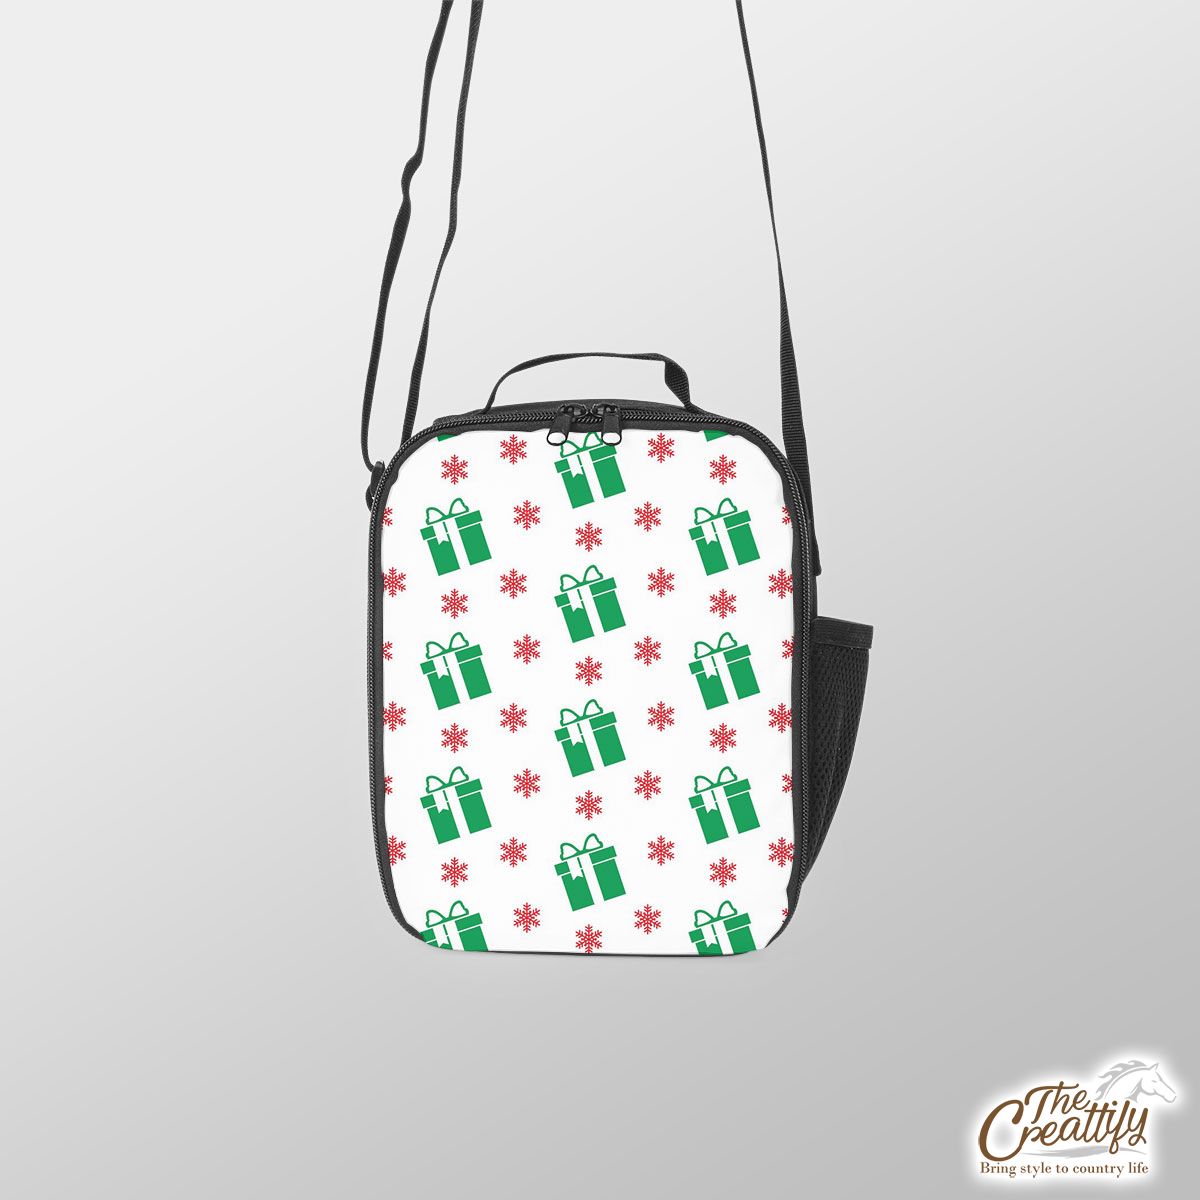 Christmas Gifts Pattern, Christmas Present Ideas Lunch Box Bag